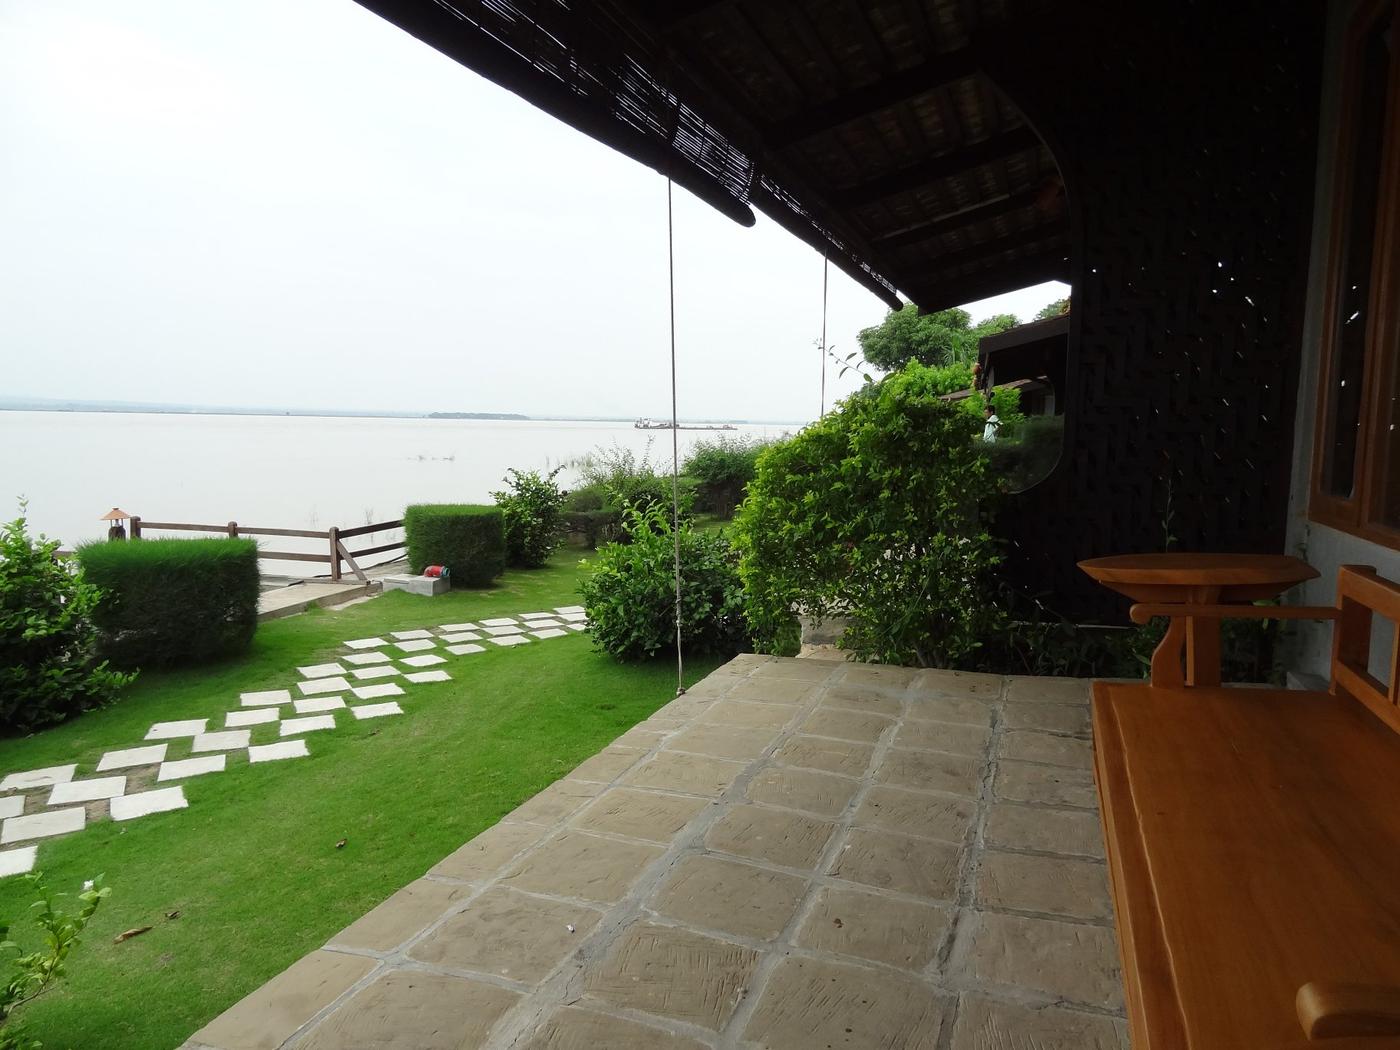 Deluxe River View Rooms, Bagan Thande Hotel